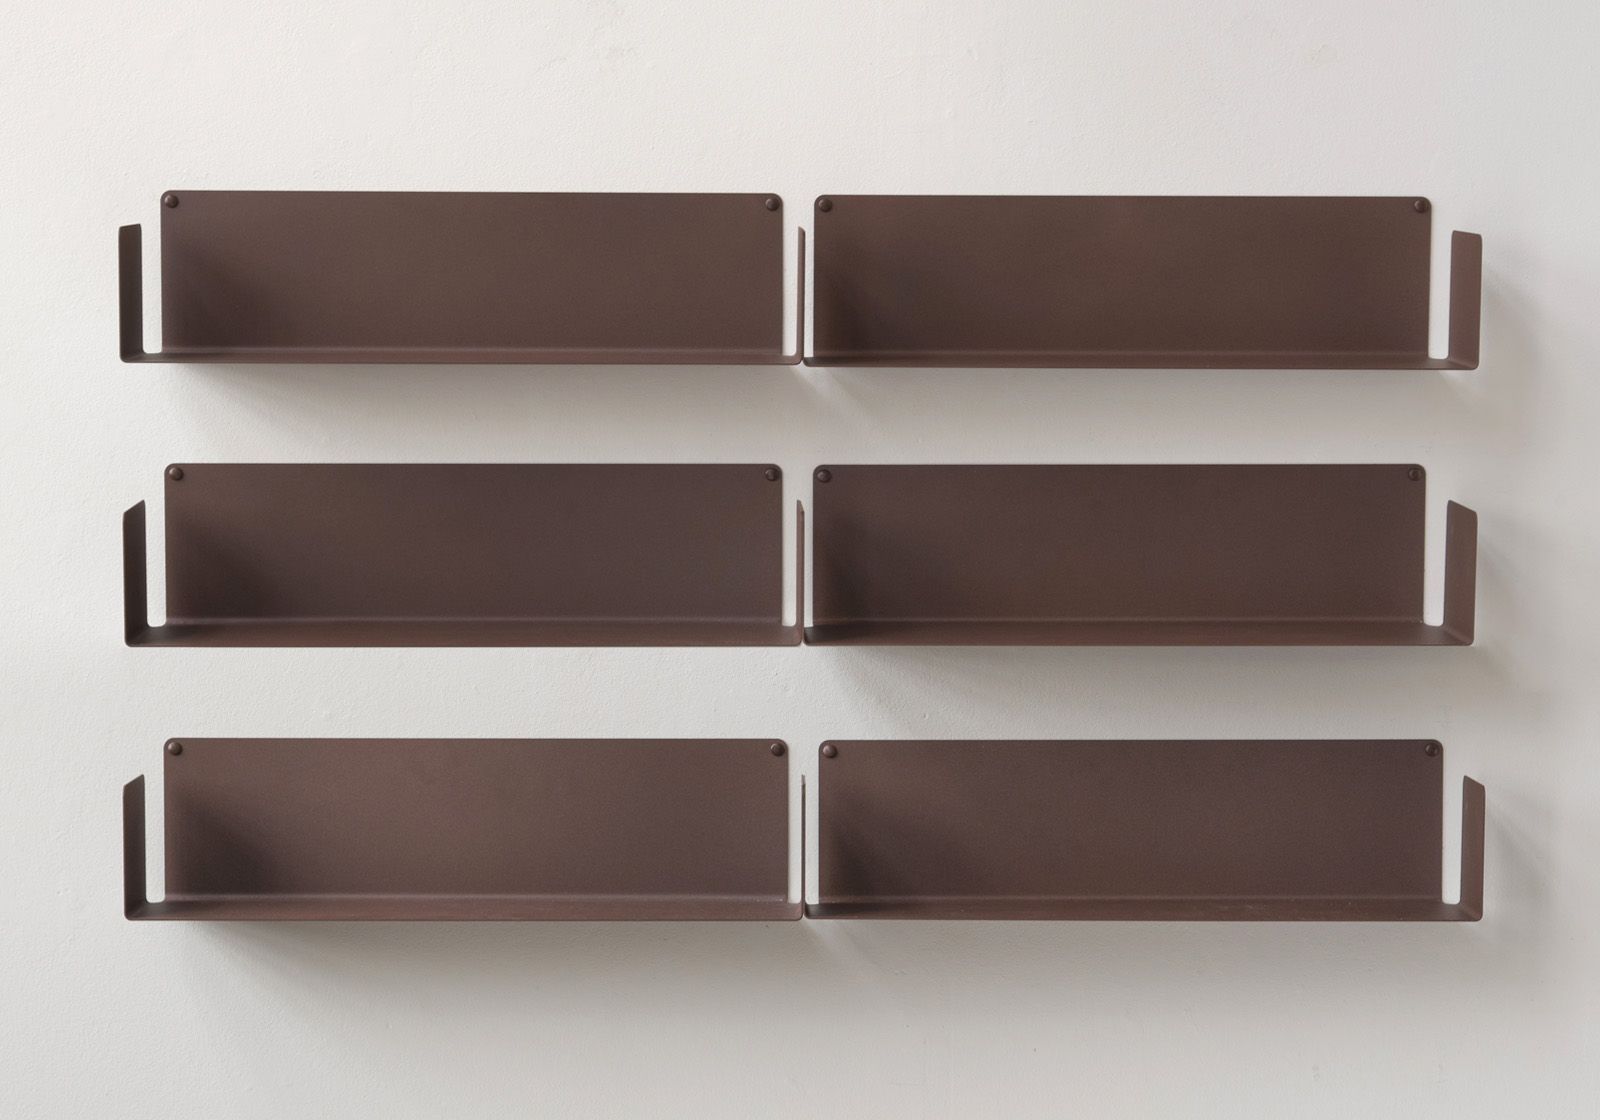 Floating shelf rust colour - 17.71 inches - Set of 2 Rust color shelves - 6